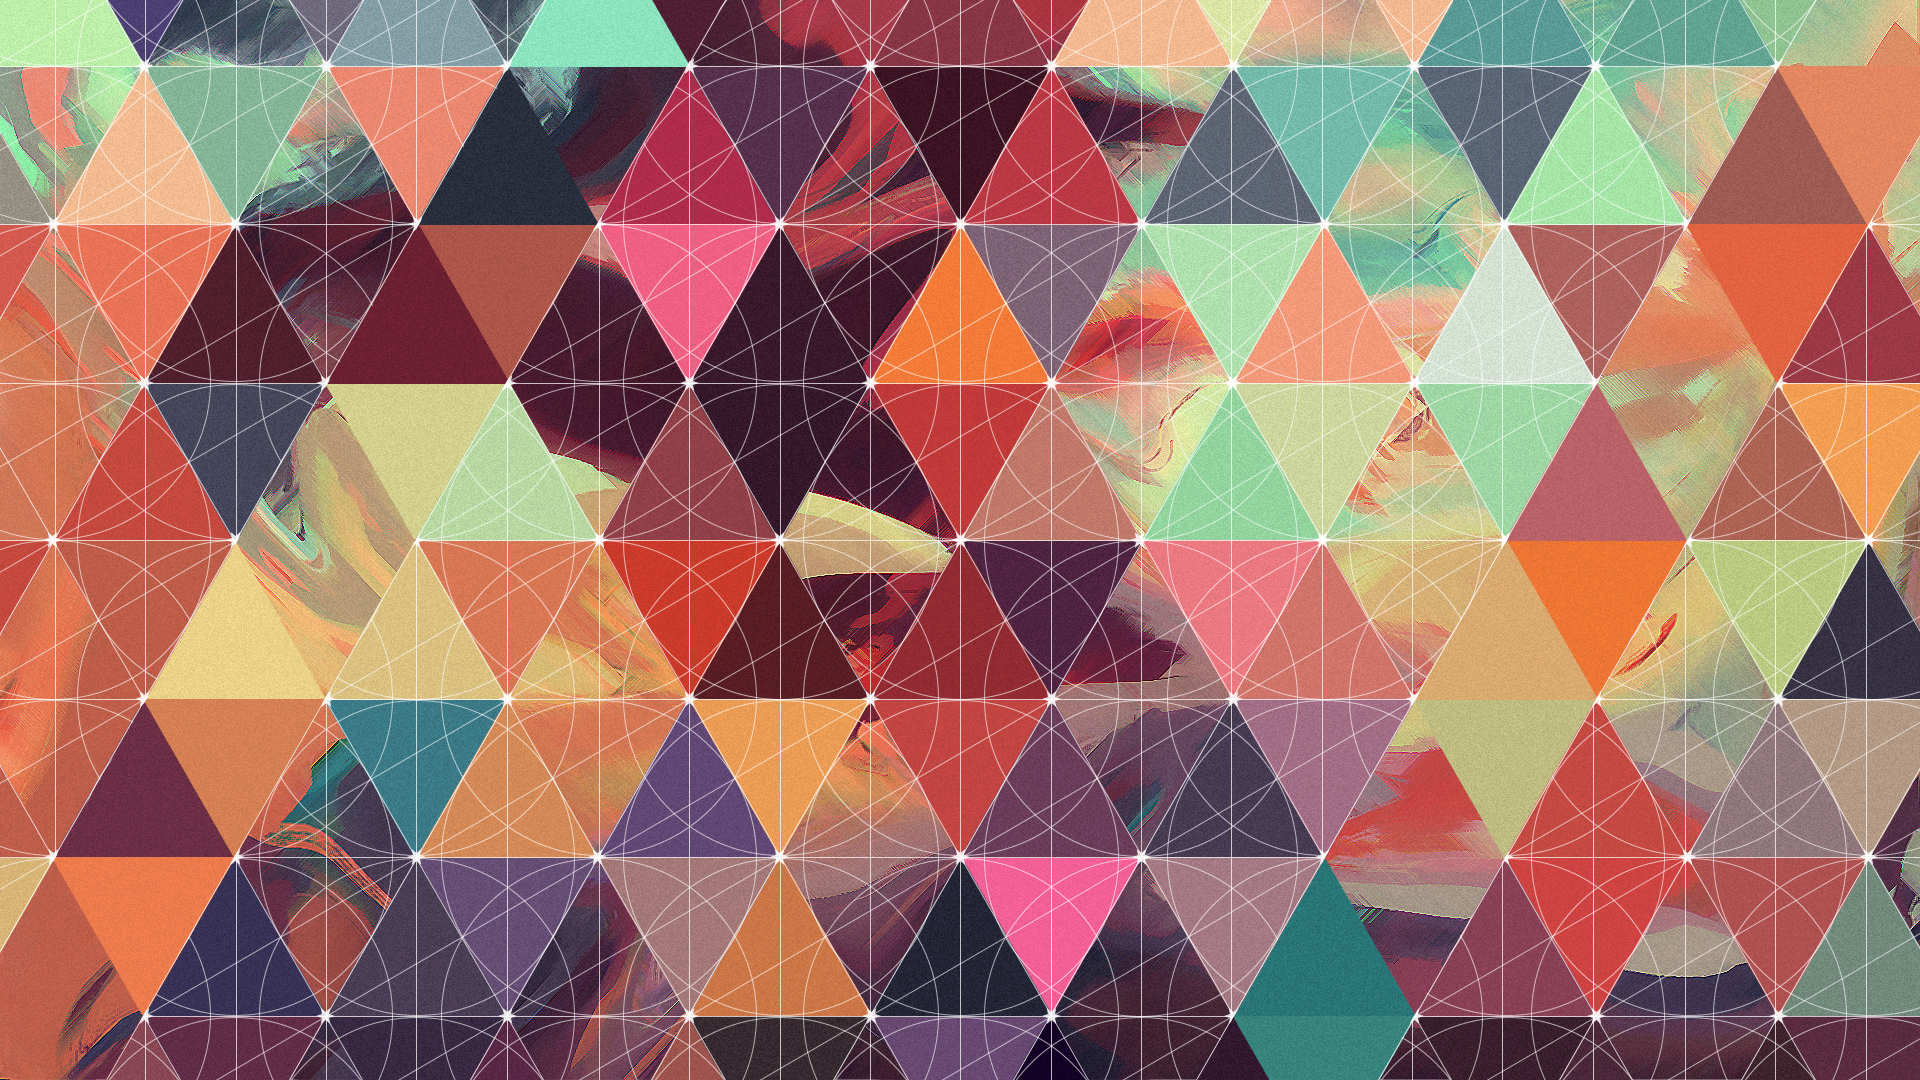 I Made A Geometric Abstract Wallpaper Today 1920x1080